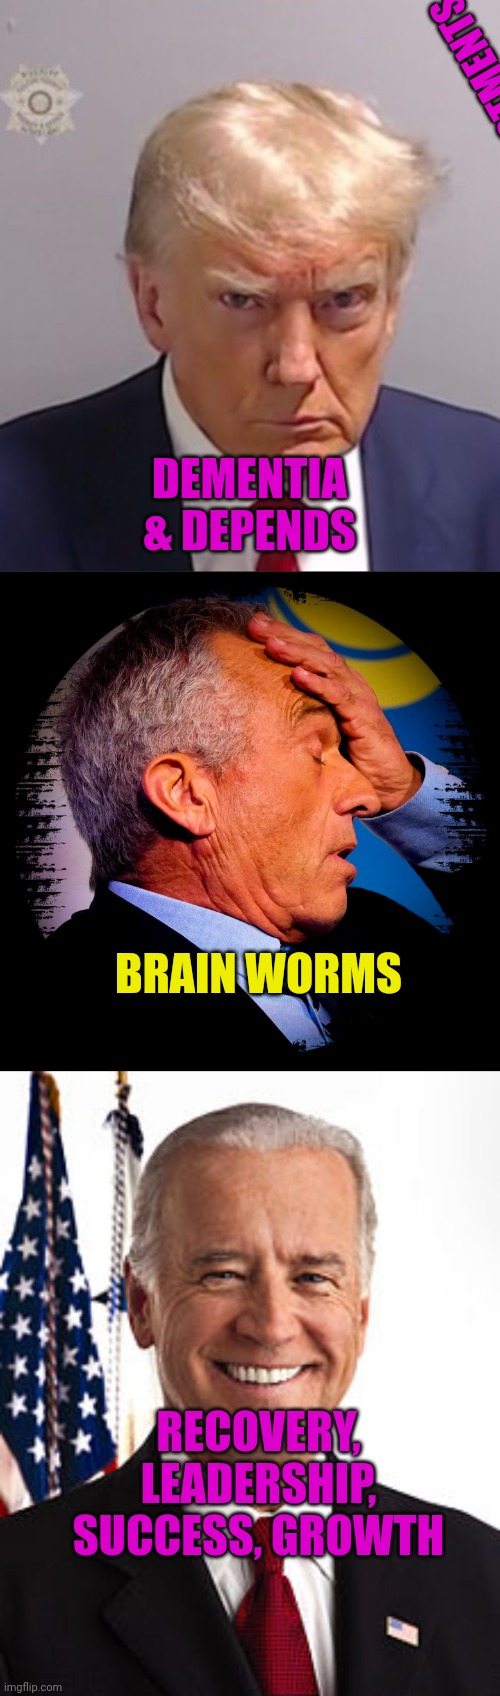 INDICTMENTS, CONVICTIONS; DEMENTIA & DEPENDS; BRAIN WORMS; RECOVERY, LEADERSHIP, SUCCESS, GROWTH | image tagged in donald trump mugshot,in your guts you know he's nuts,memes,joe biden | made w/ Imgflip meme maker